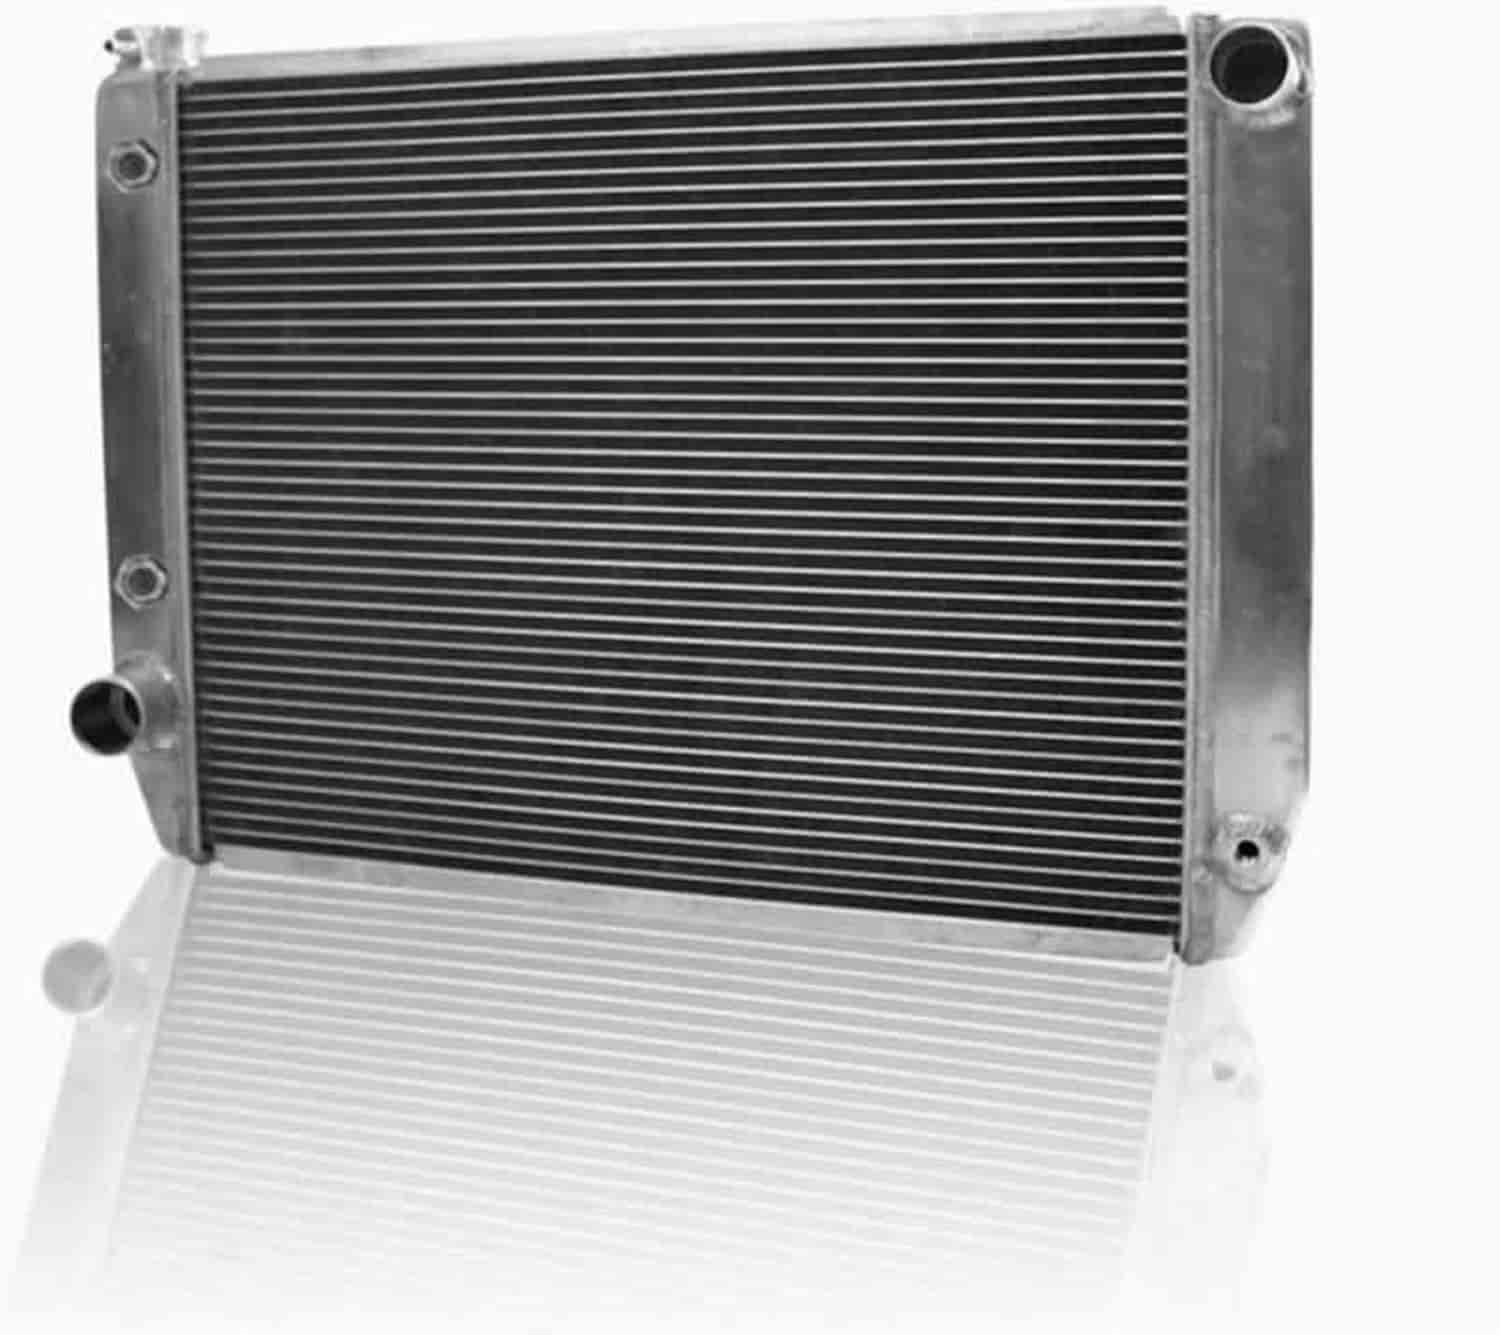 ClassicCool Universal Fit Radiator Single Pass Crossflow Design 27.50" x 19" with Transmission Cooler